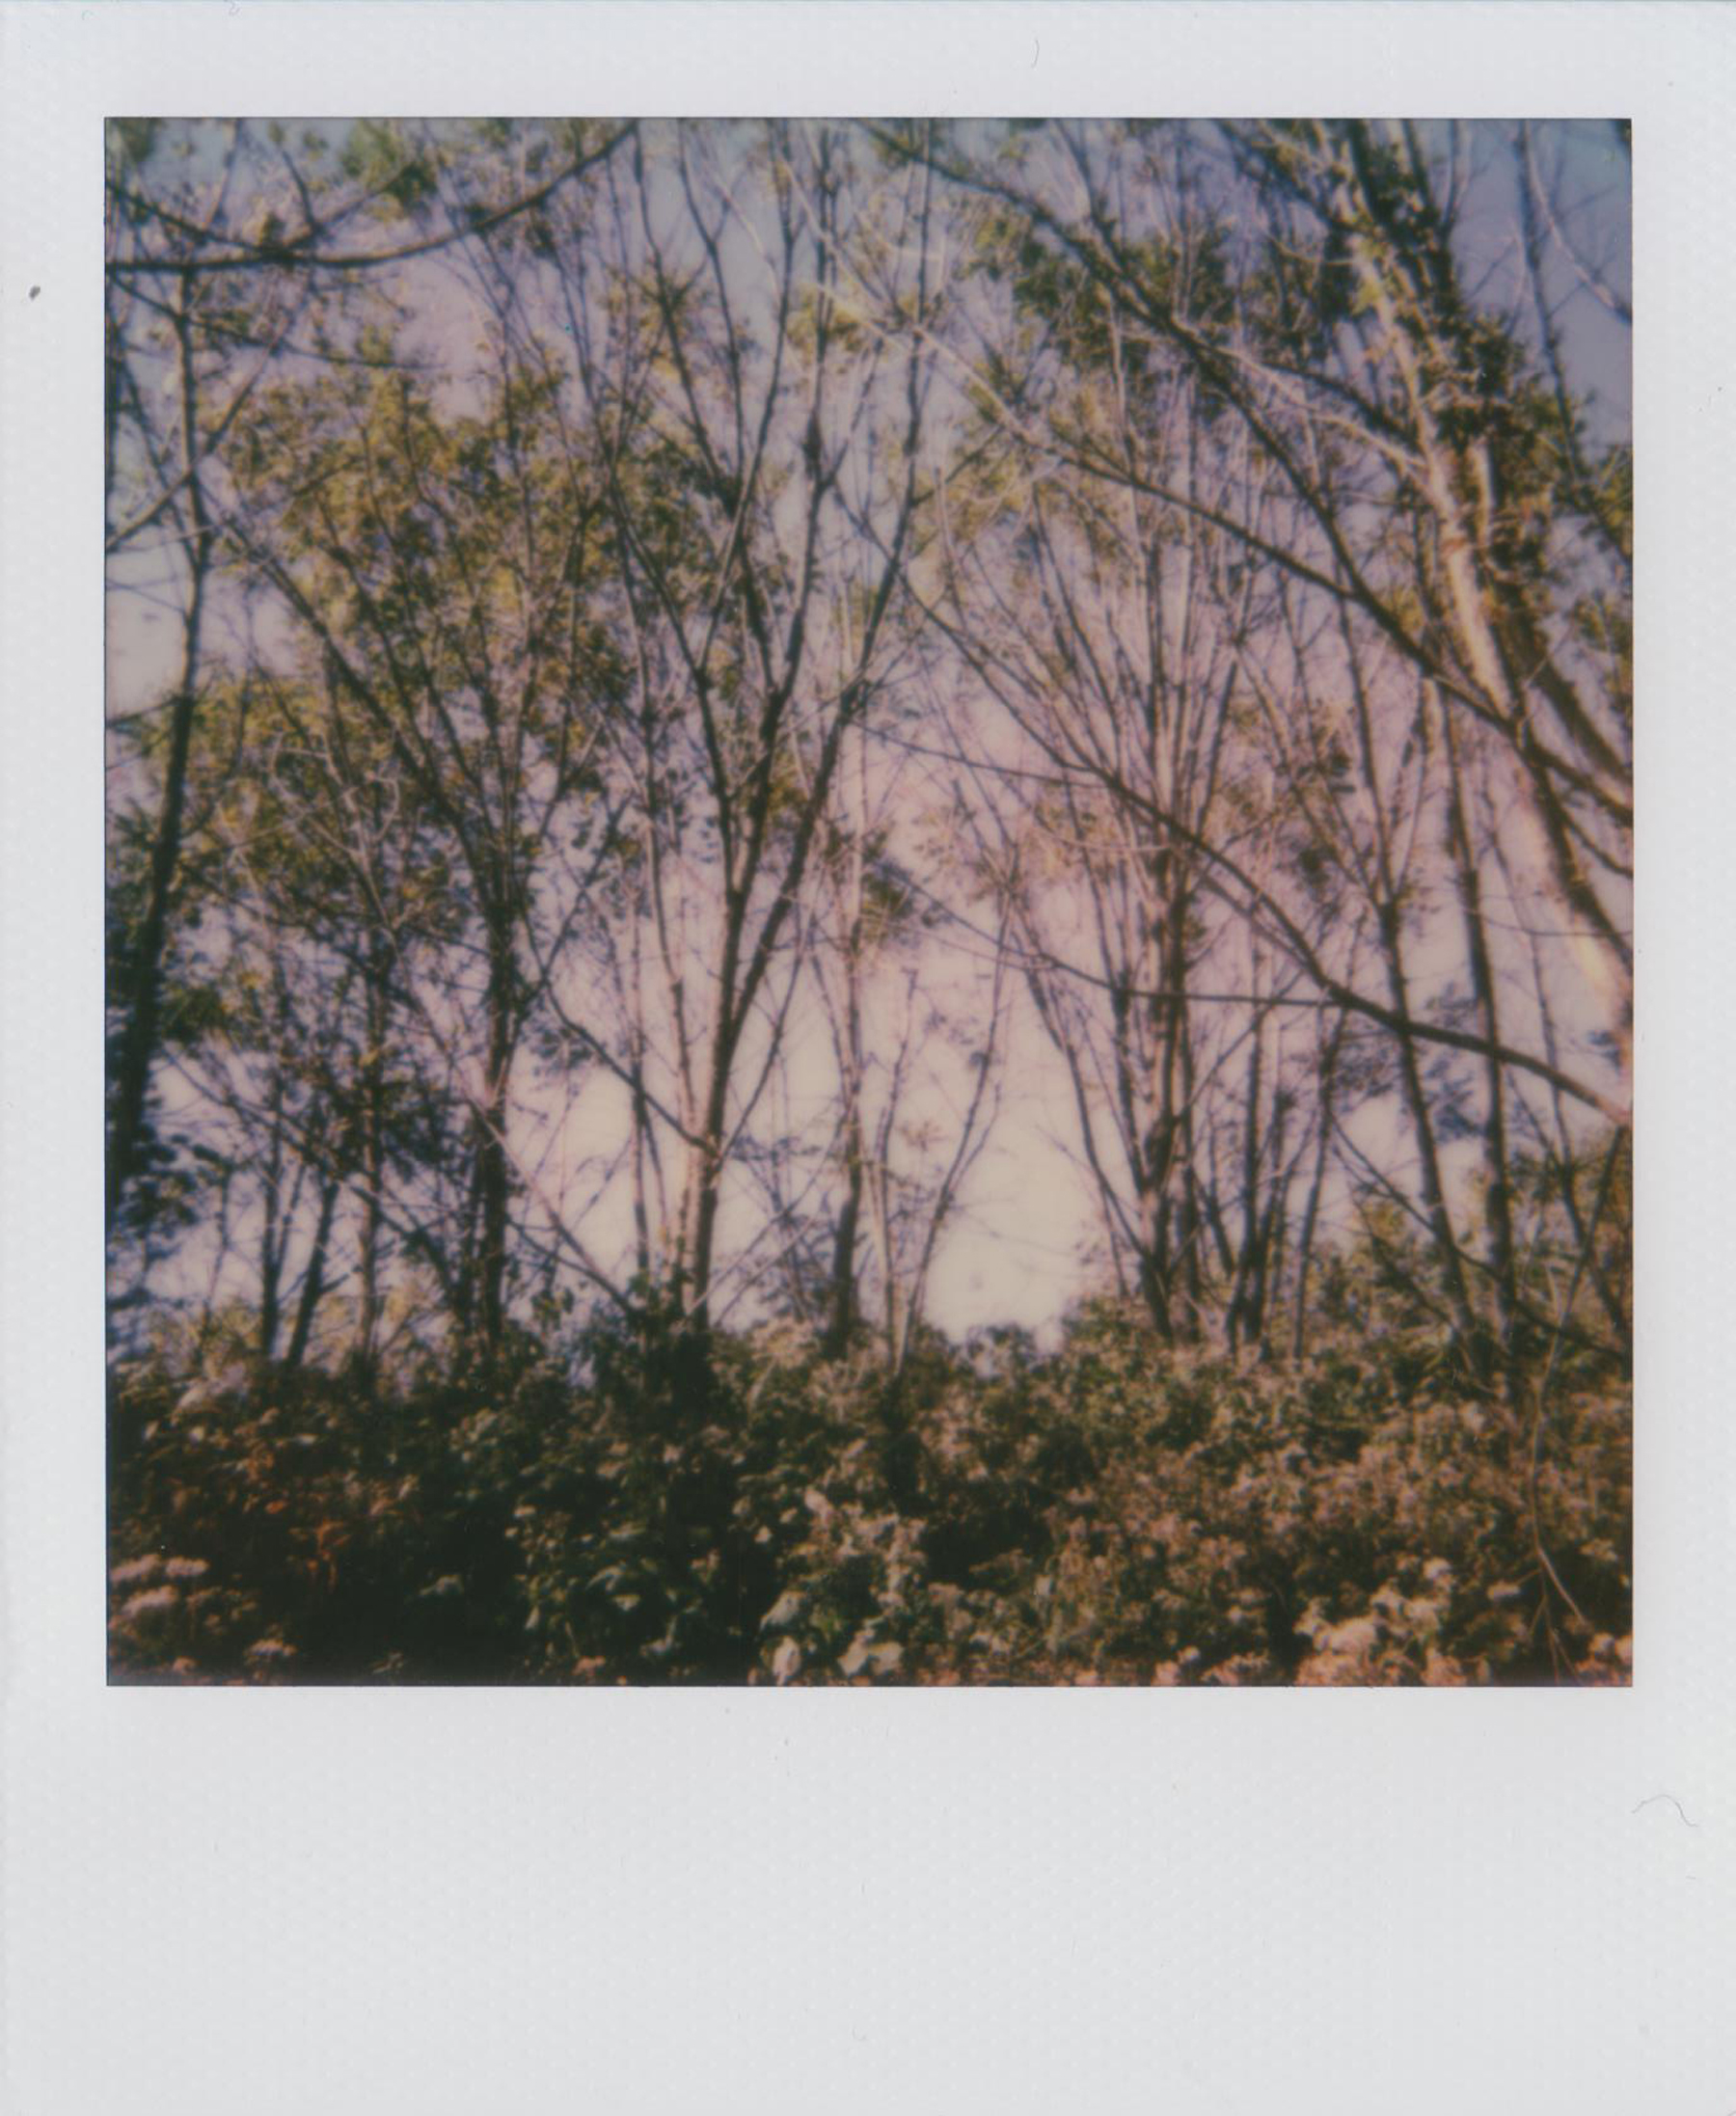 All images Polaroid Spirit 600 and Polaroid Spectra, Impossible Project film